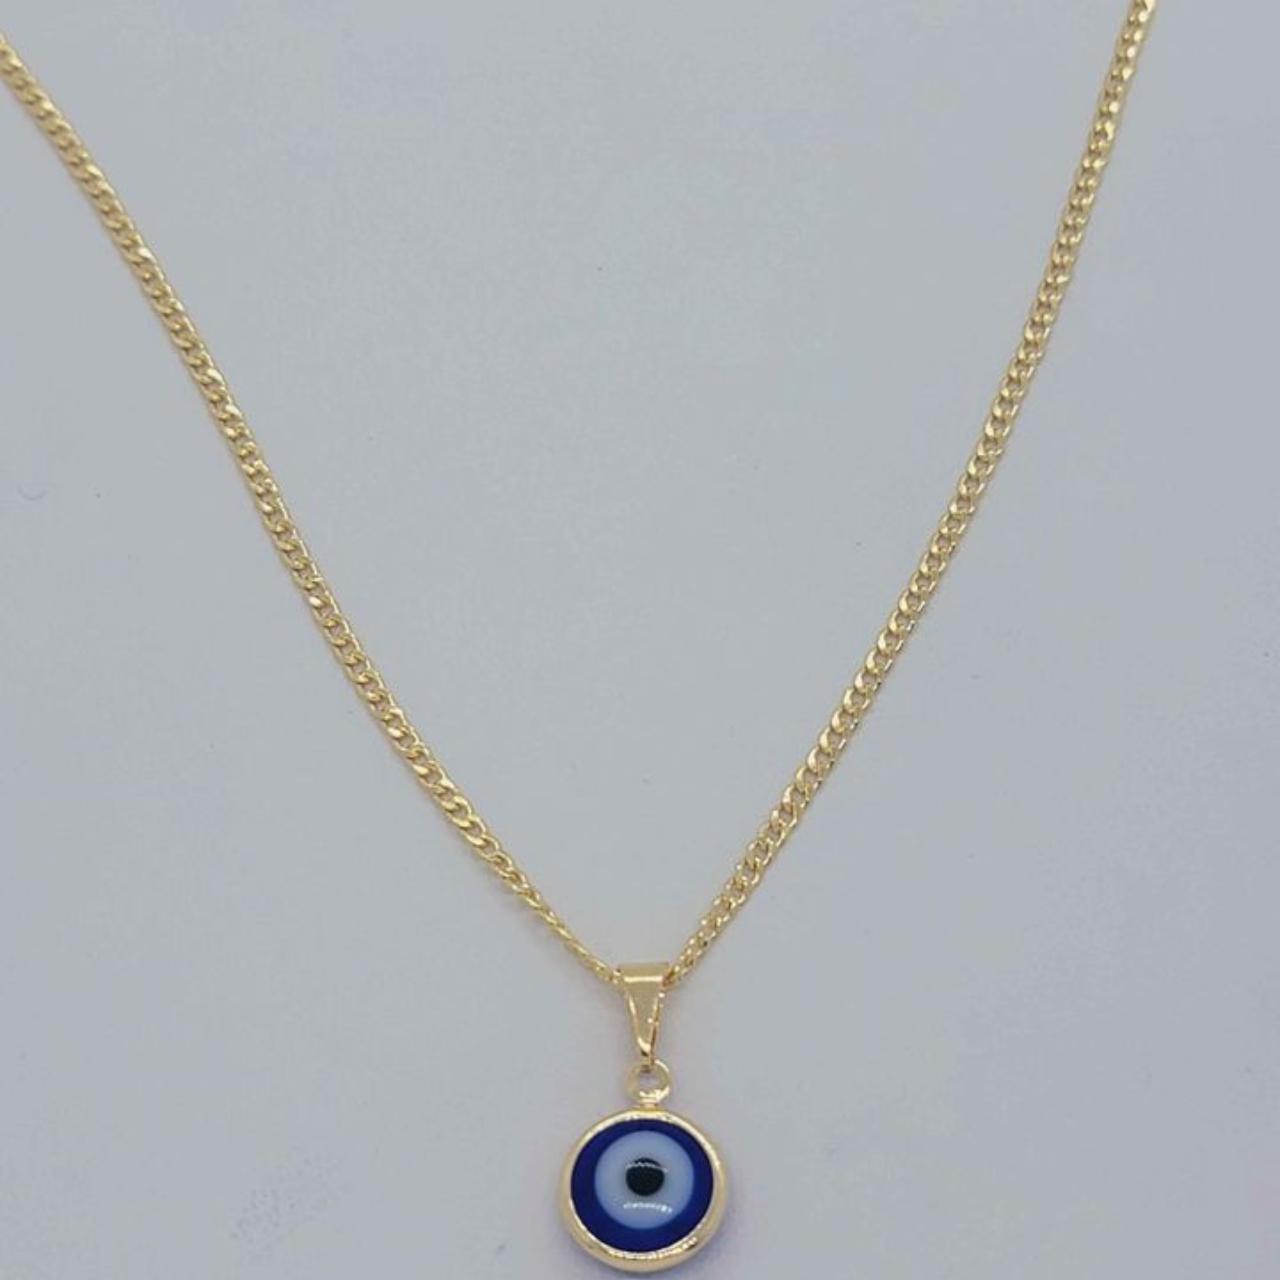 Women's Gold and Blue Jewellery (3)